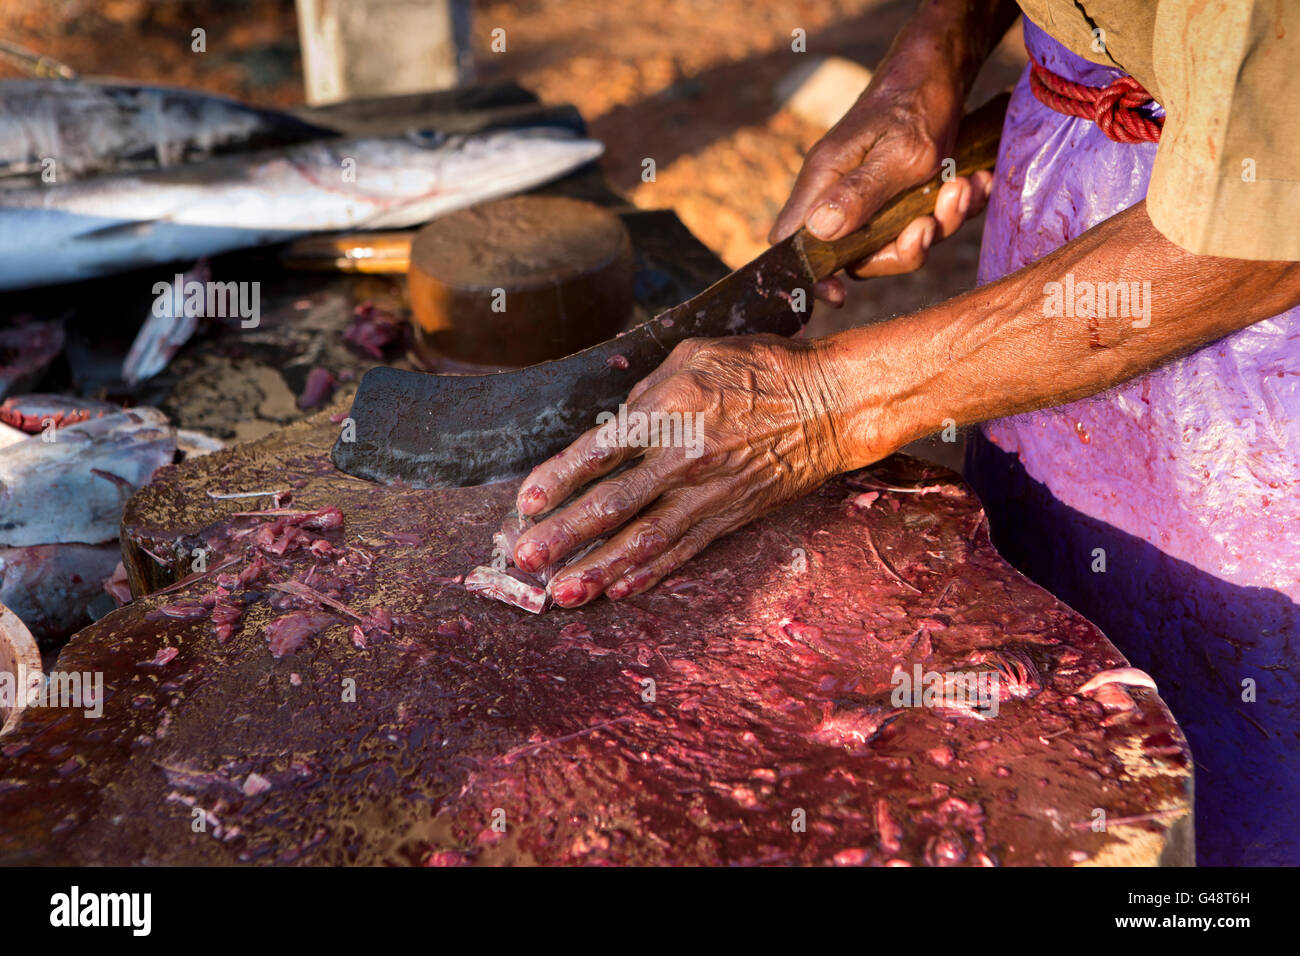 Sri Lanka, Mirissa Harbour, worker cutting up fish for sale in small quantities Stock Photo